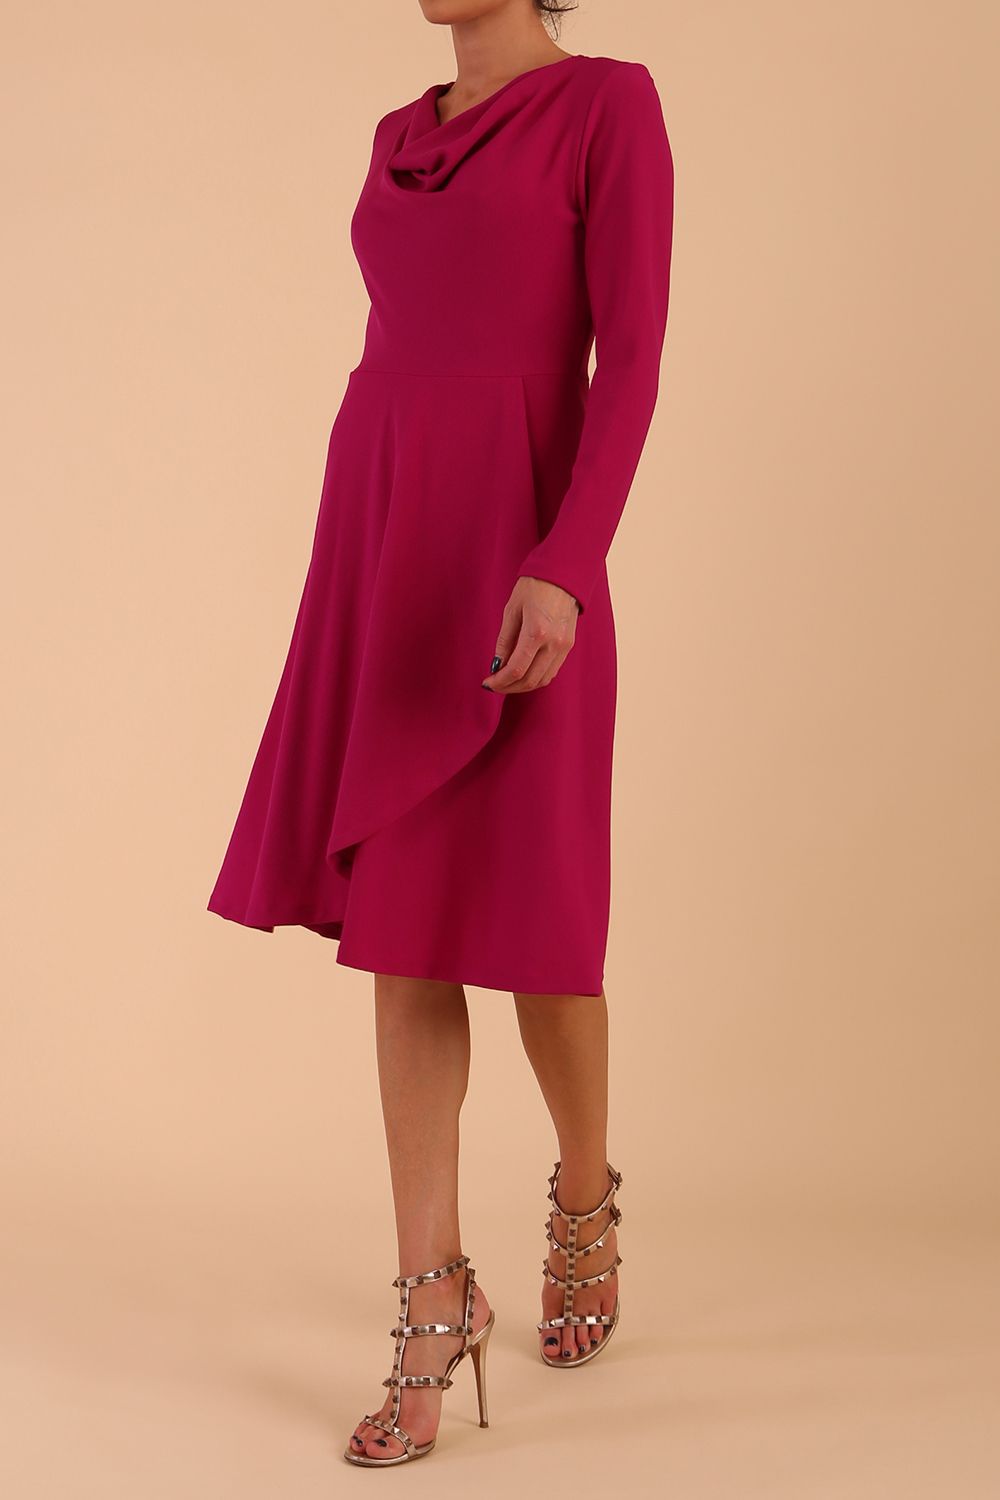 model is wearing diva catwalk moraig swing long sleeve dress with high cowl neckline and wrap skirt in magenta front